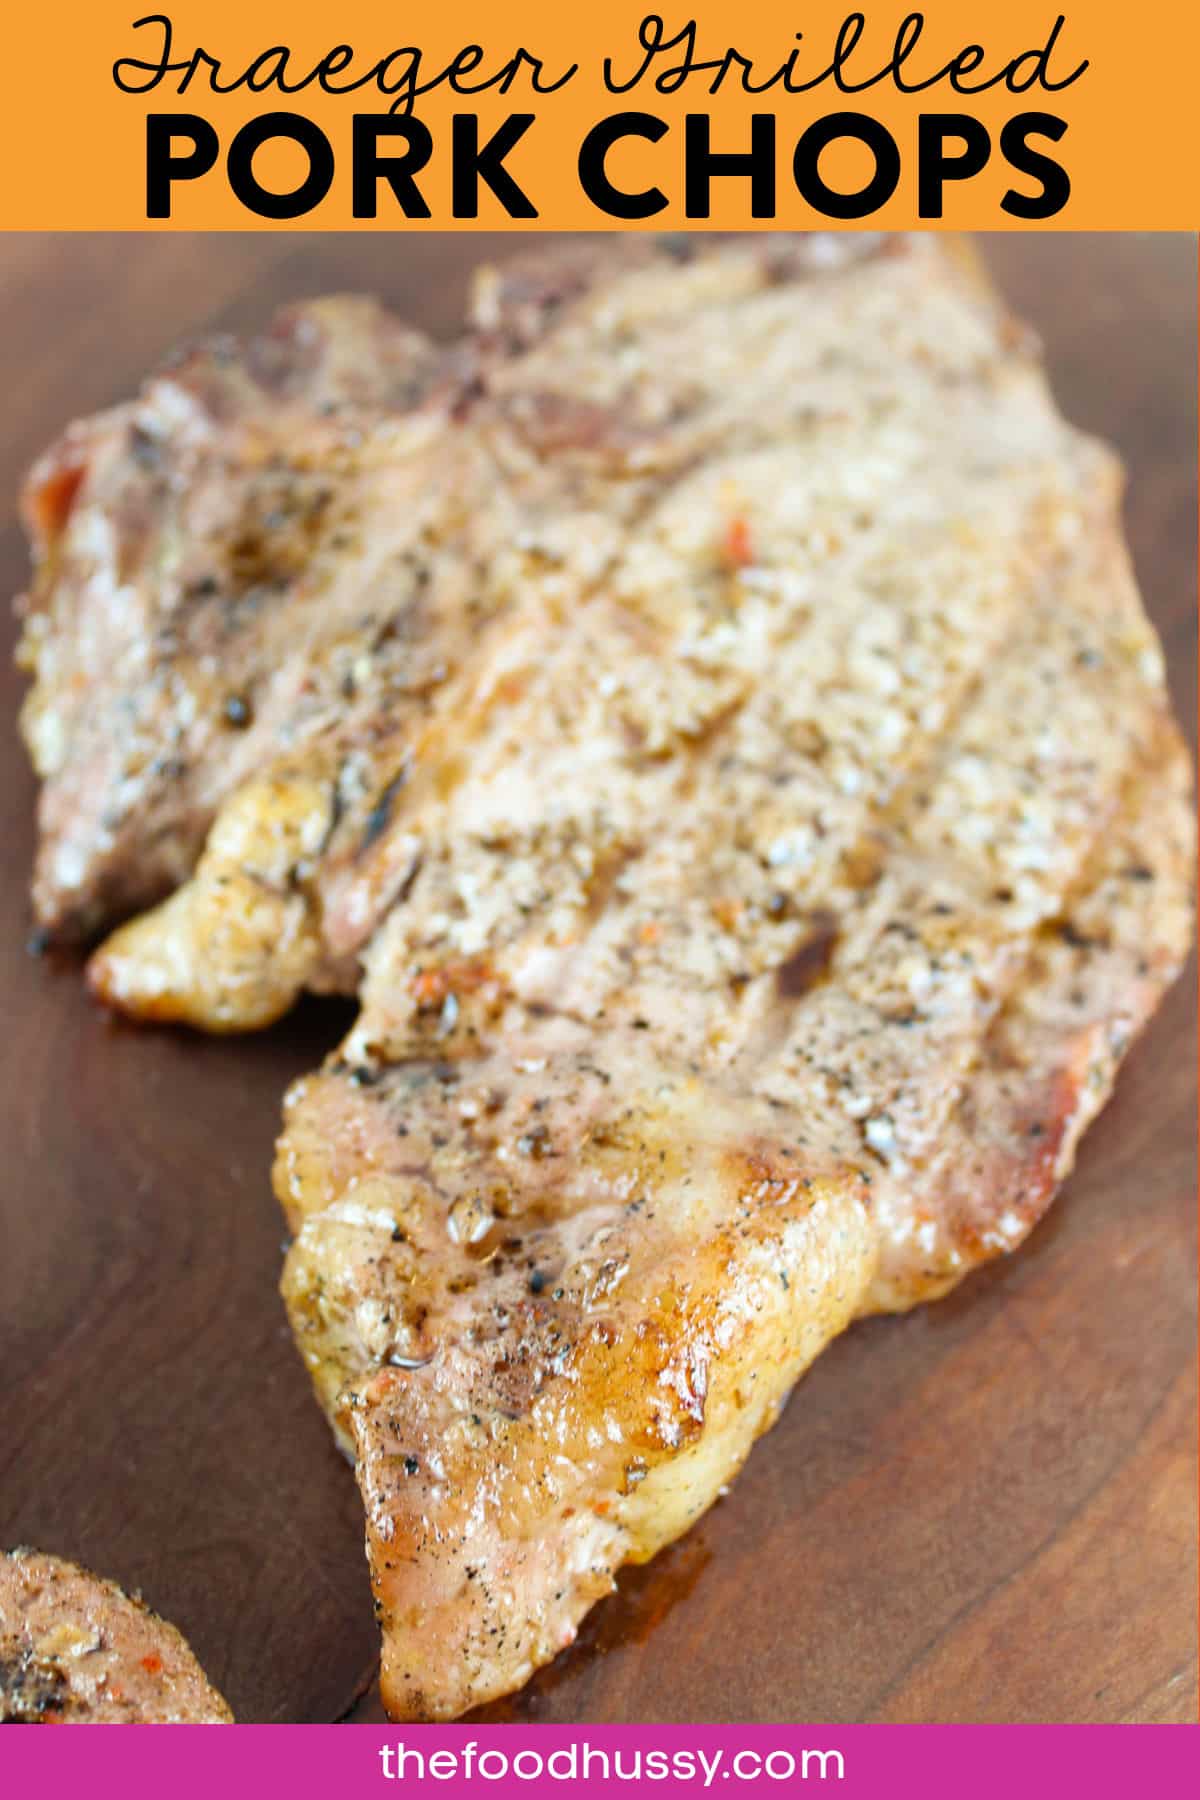 Traeger Grilled Pork Chops are tender, juicy and so full of flavor from an easy, 2-ingredient marinade! Plus - they're done in 15 minutes - perfect for any weeknight meal.  via @foodhussy